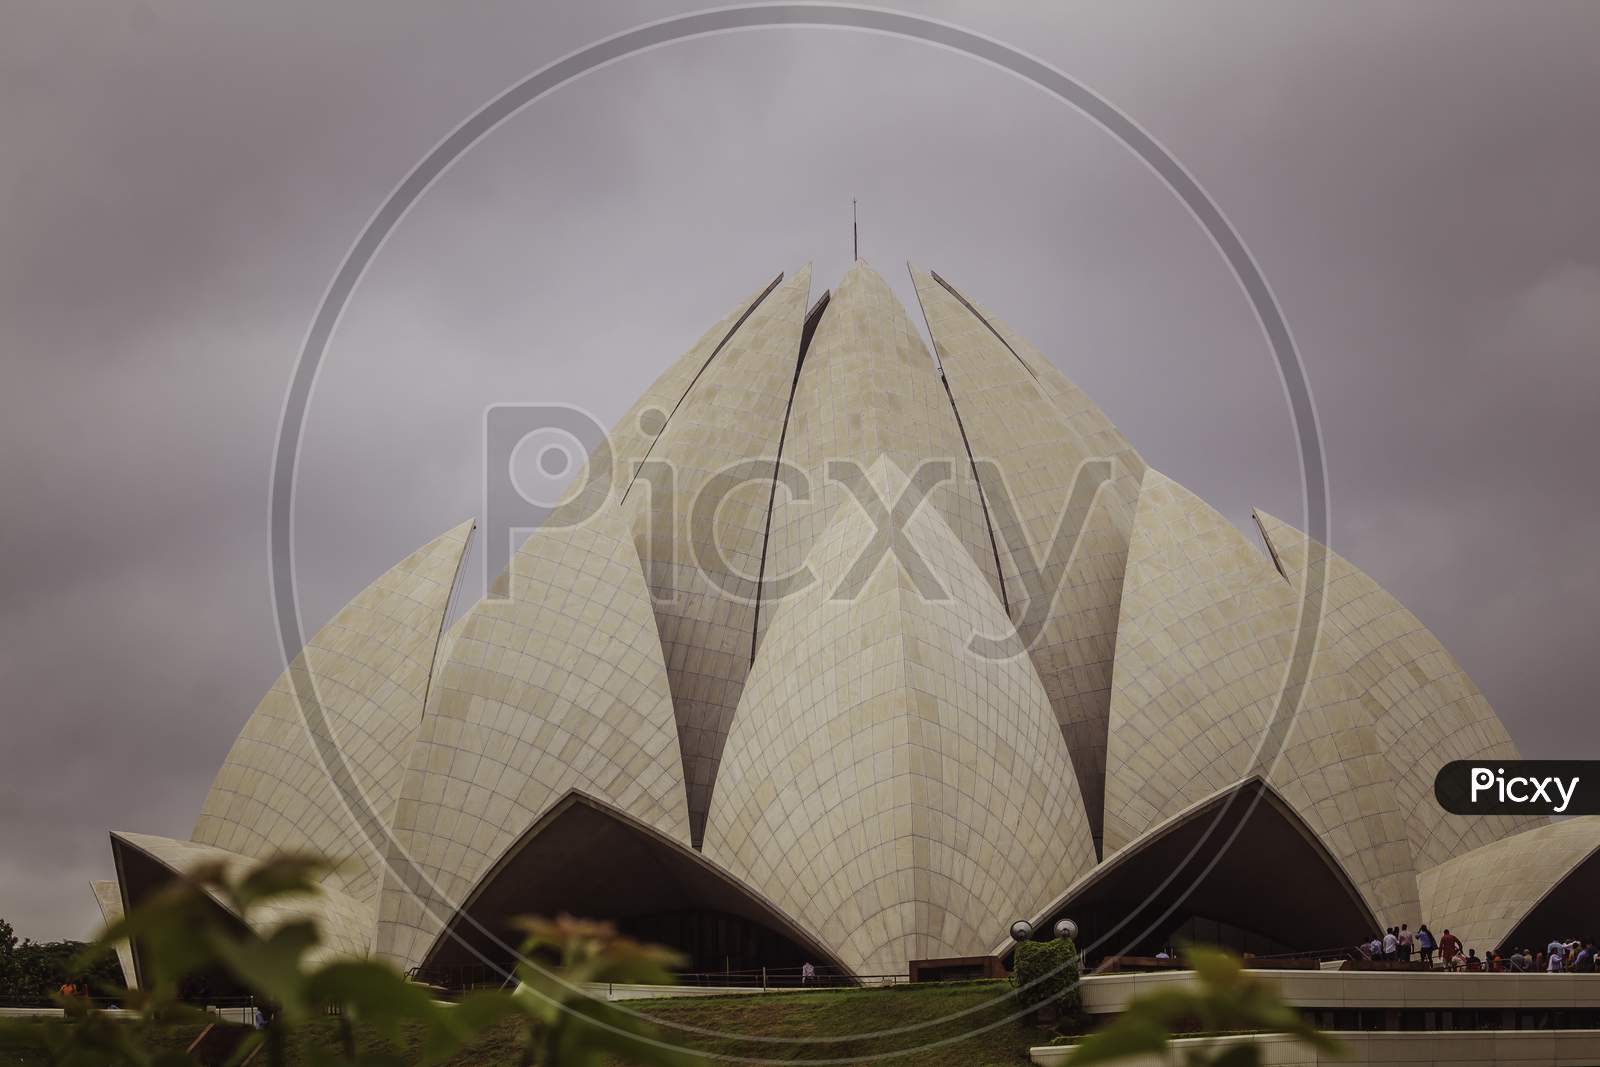 The Lotus Temple, Located In New Delhi, India, Is A Bahai House Of Worship